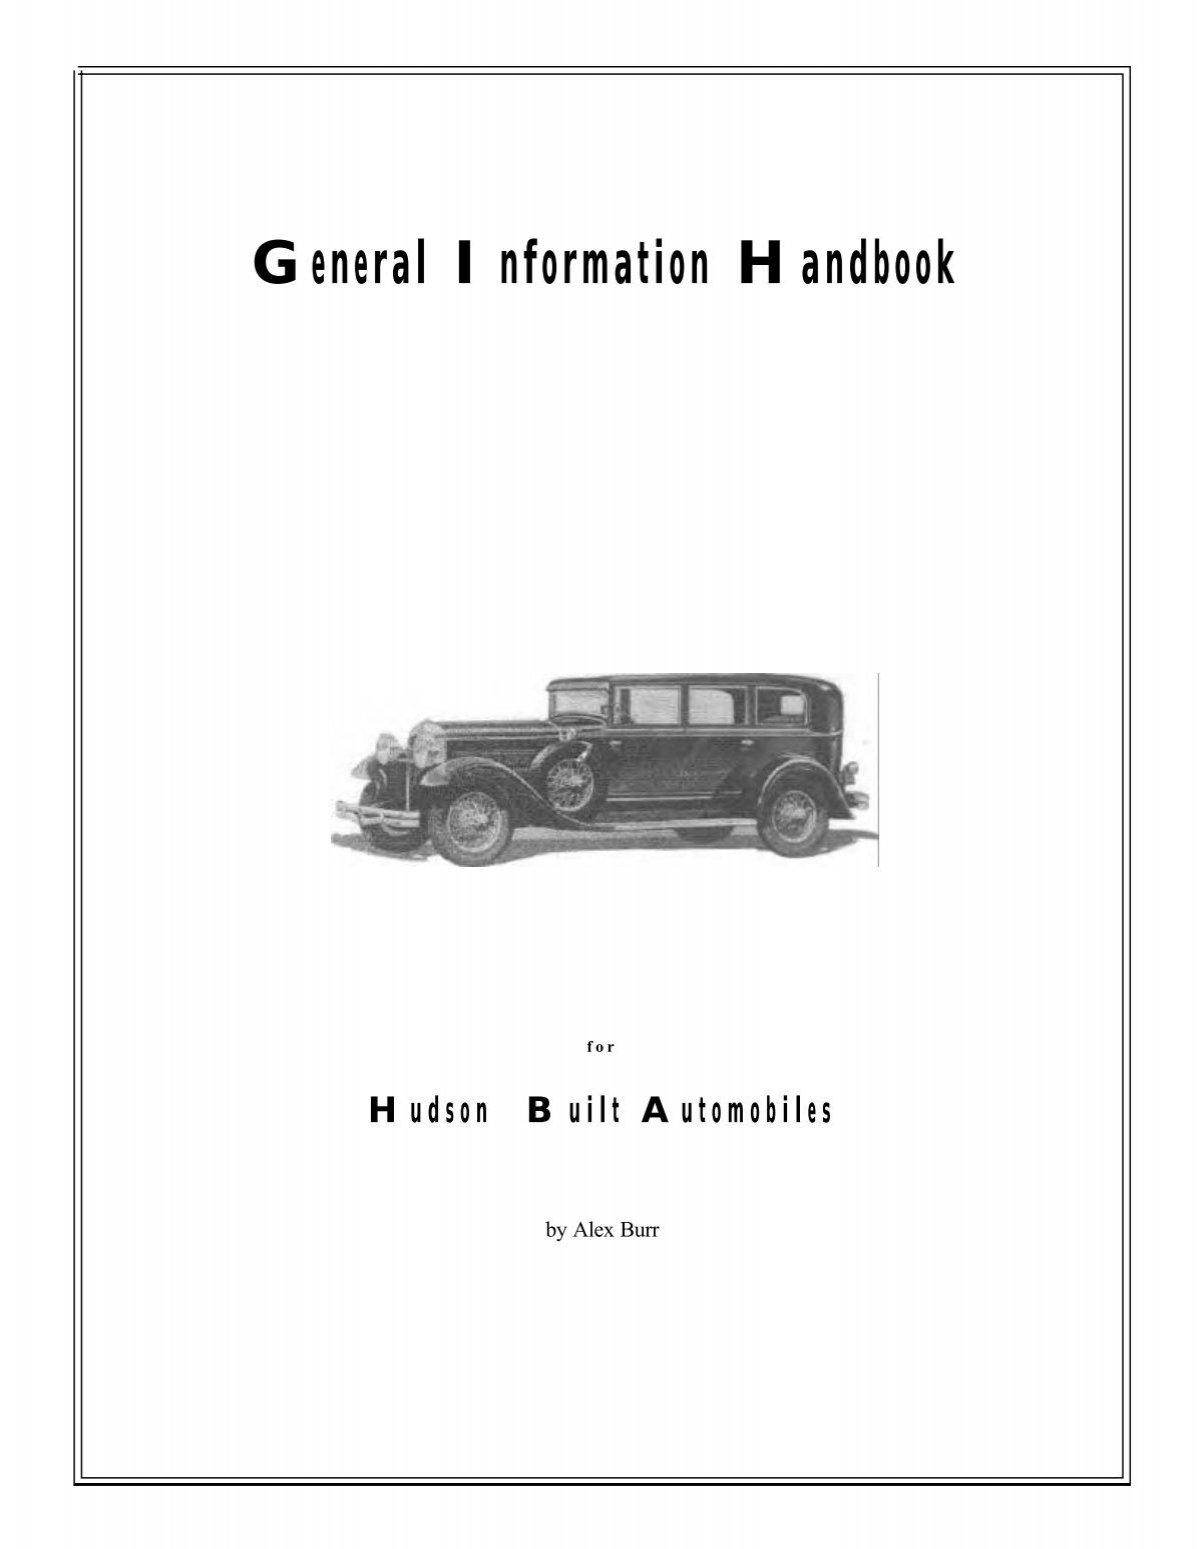 Automobiles Handbook Alex by Hudson The General Information for